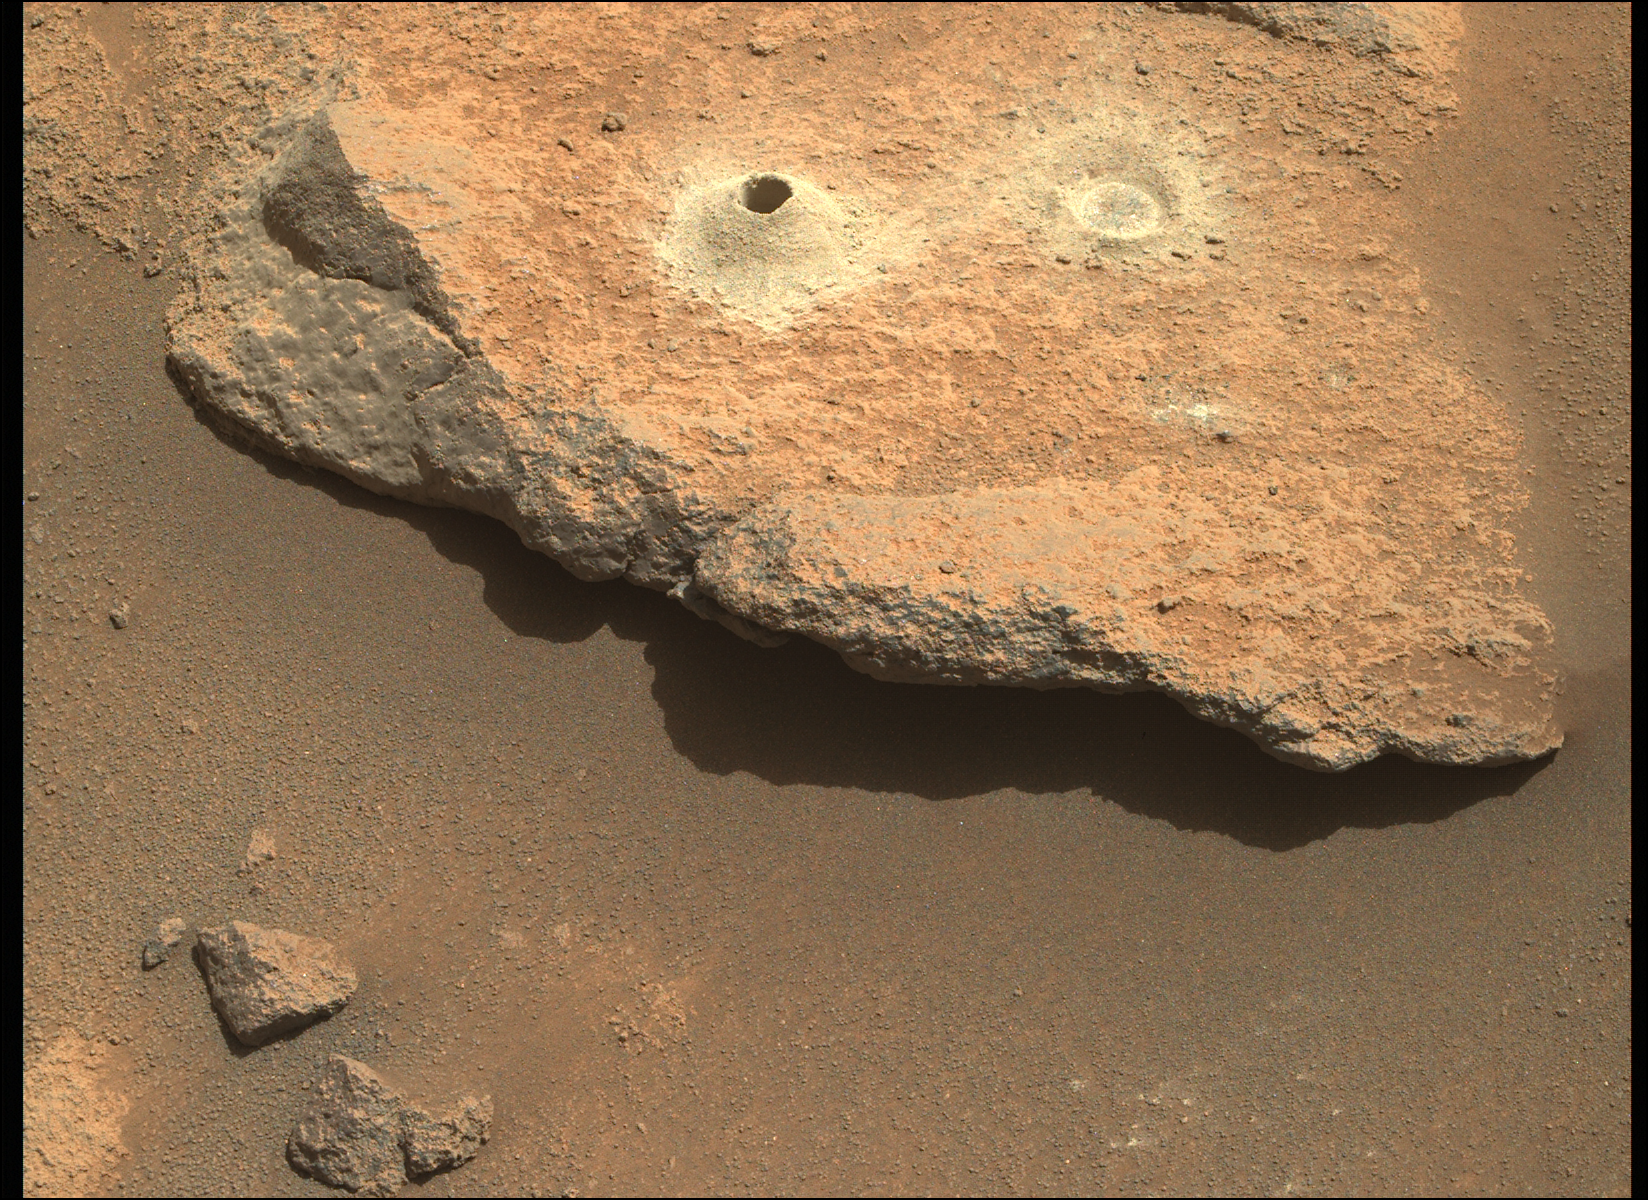 Image taken was taken by the Mars Perseverance rover after collecting the rock sample 6 at Robine. The image shows a rock with a drillhole and abrasion.